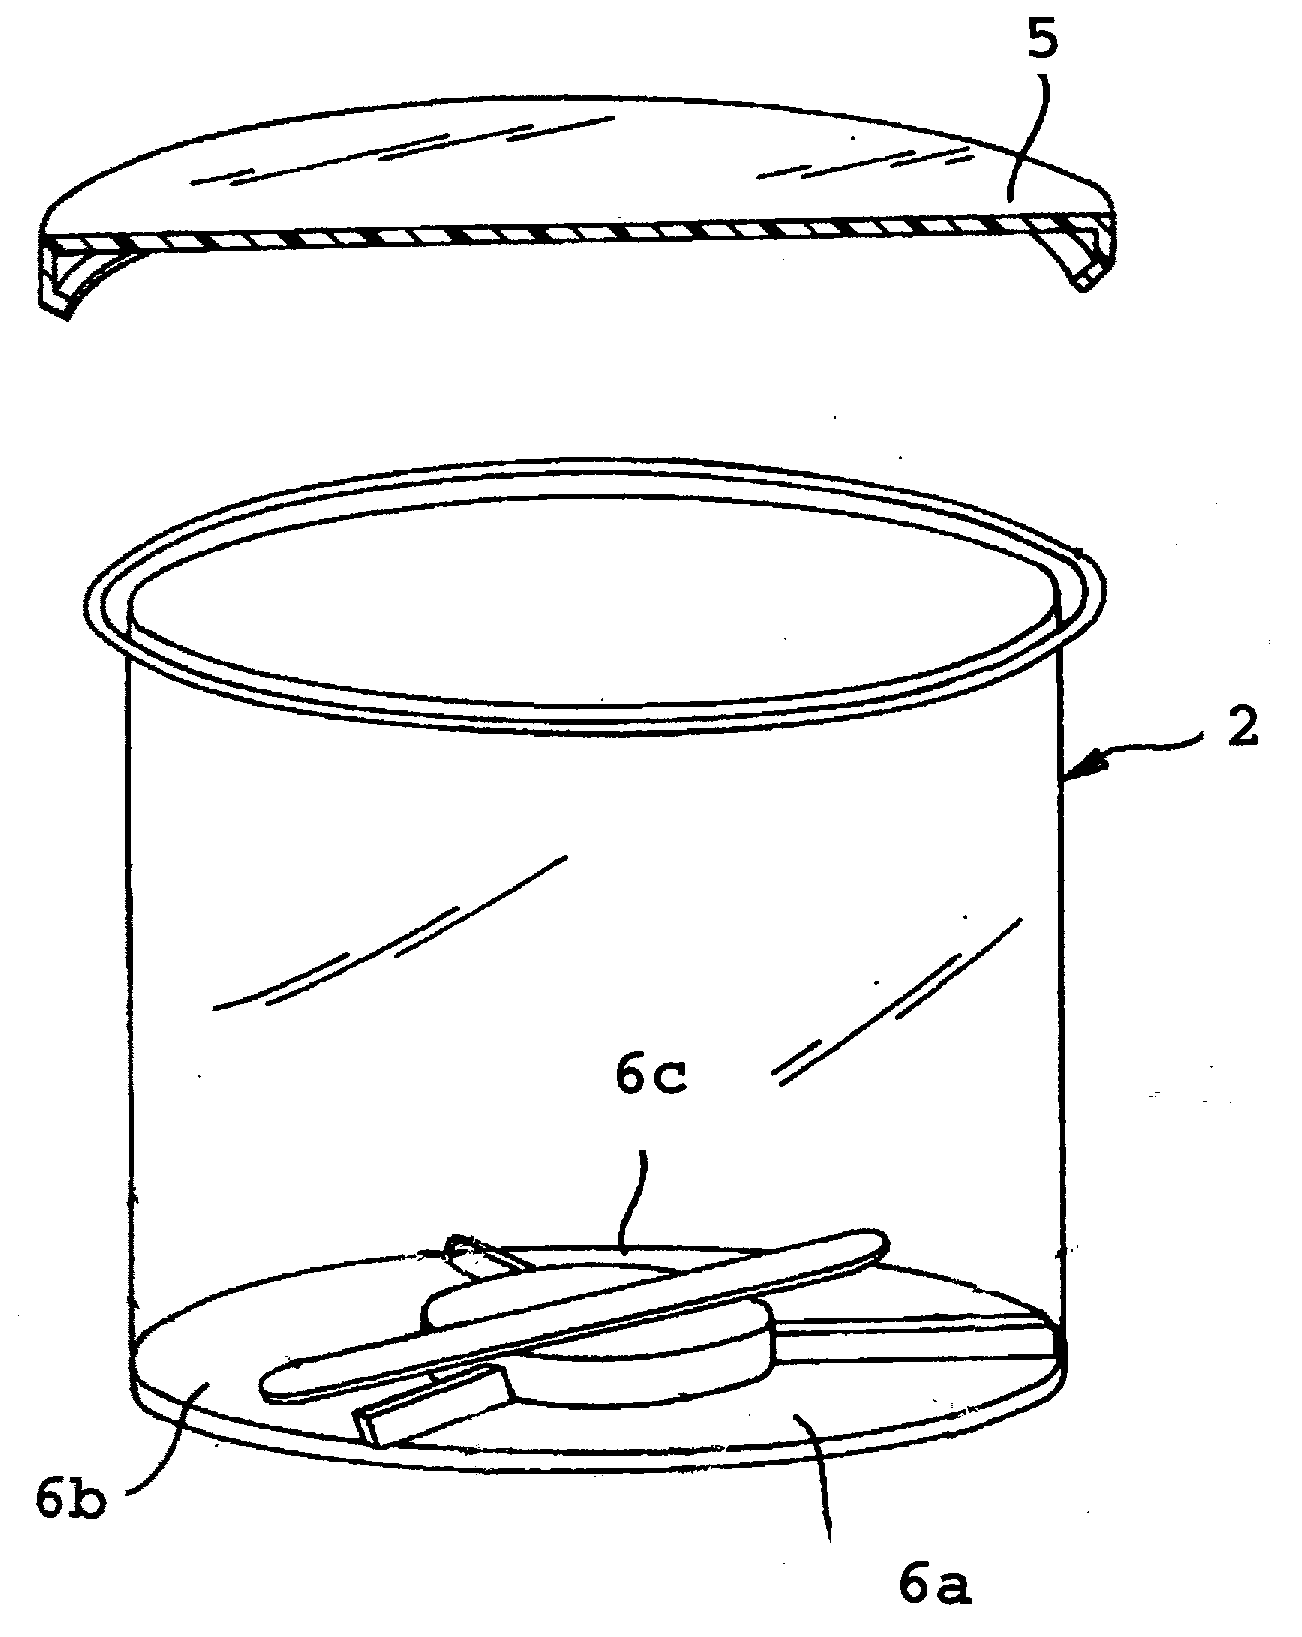 Composition for the determination of coagulation characteristics of a test liquid